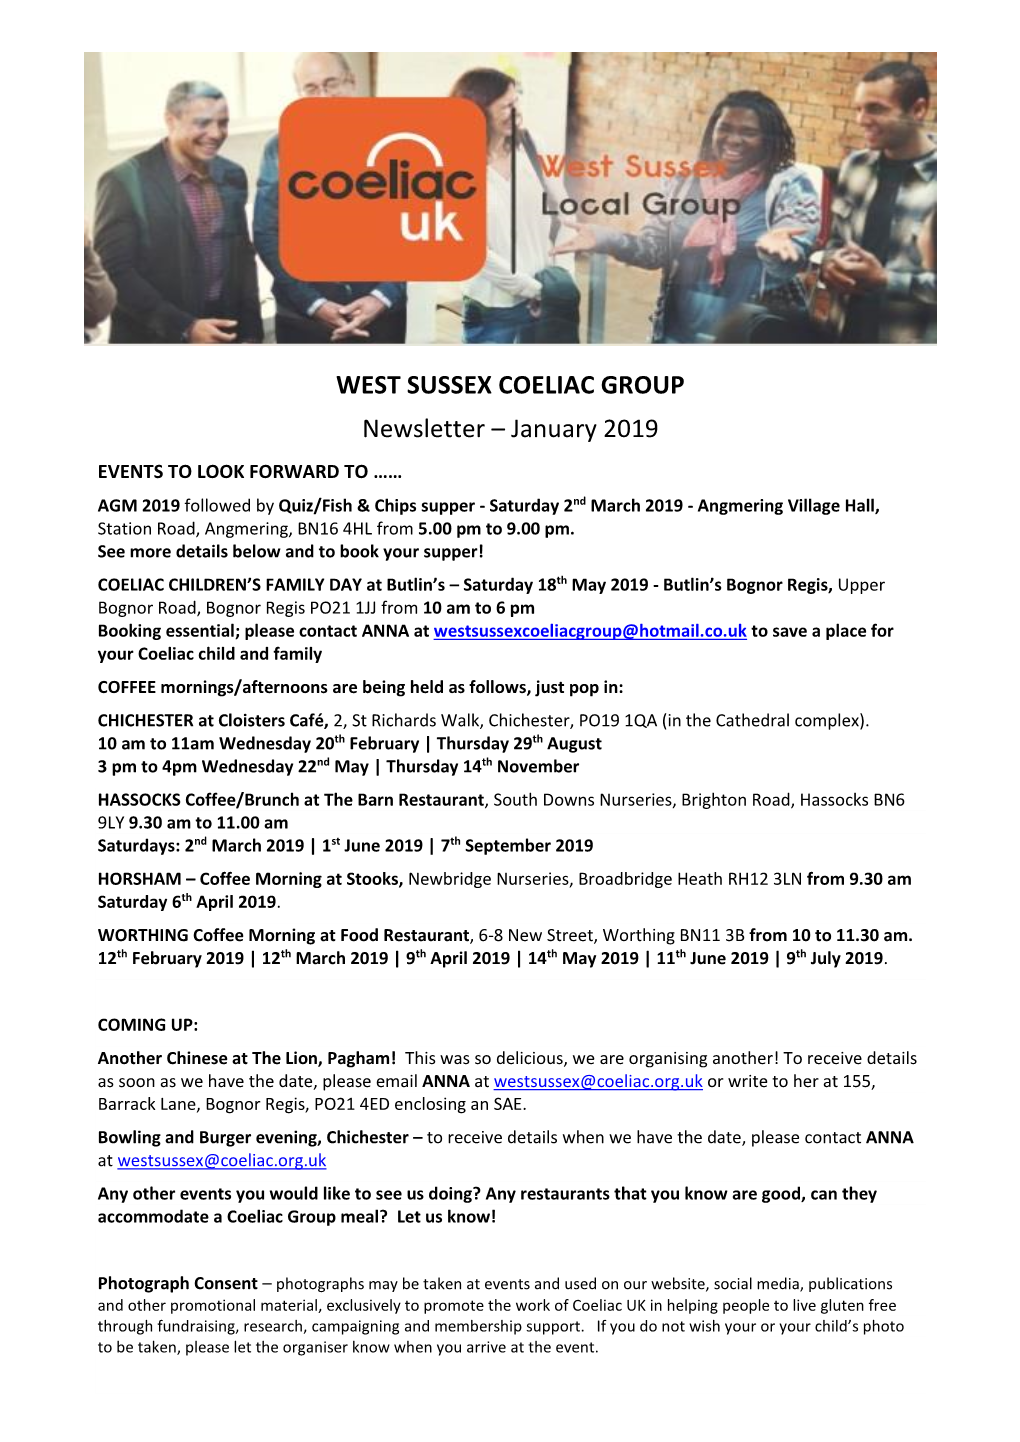 WEST SUSSEX COELIAC GROUP Newsletter – January 2019